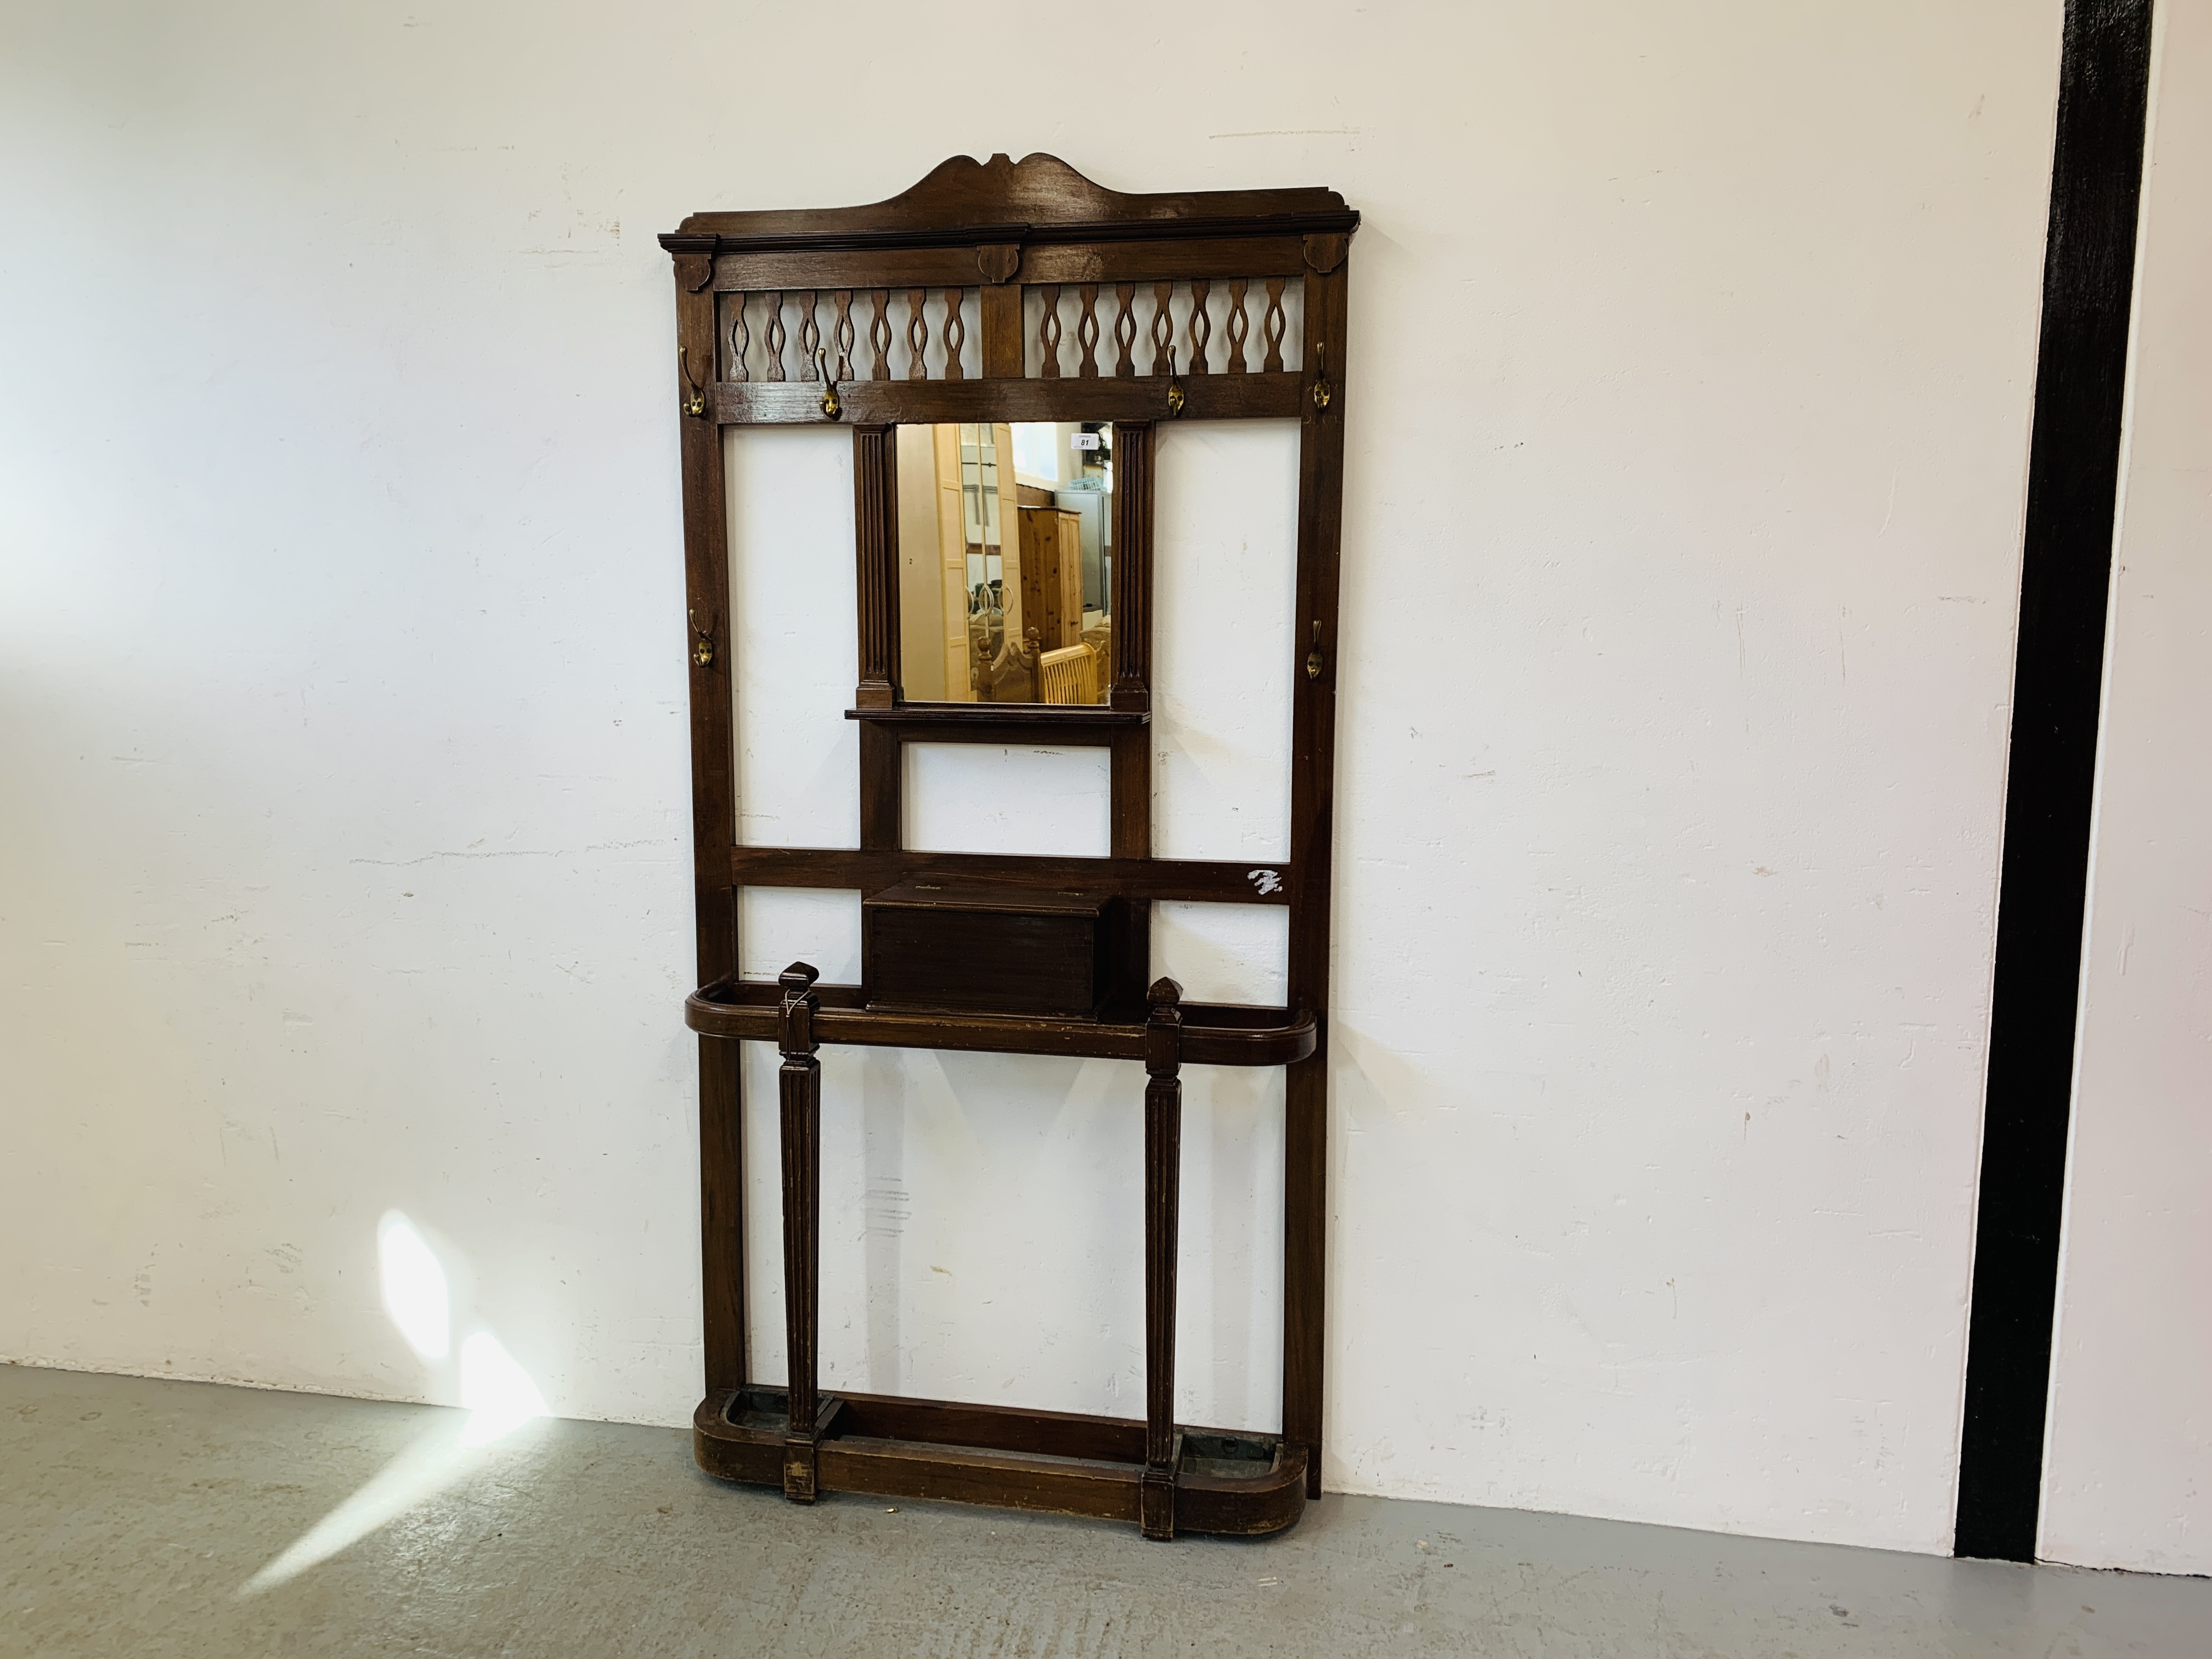 A MAHOGANY HALL STAND WITH CENTRAL MIRROR AND GLOVE BOX. W 99CM. D 19CM. H 195CM. - Image 10 of 10